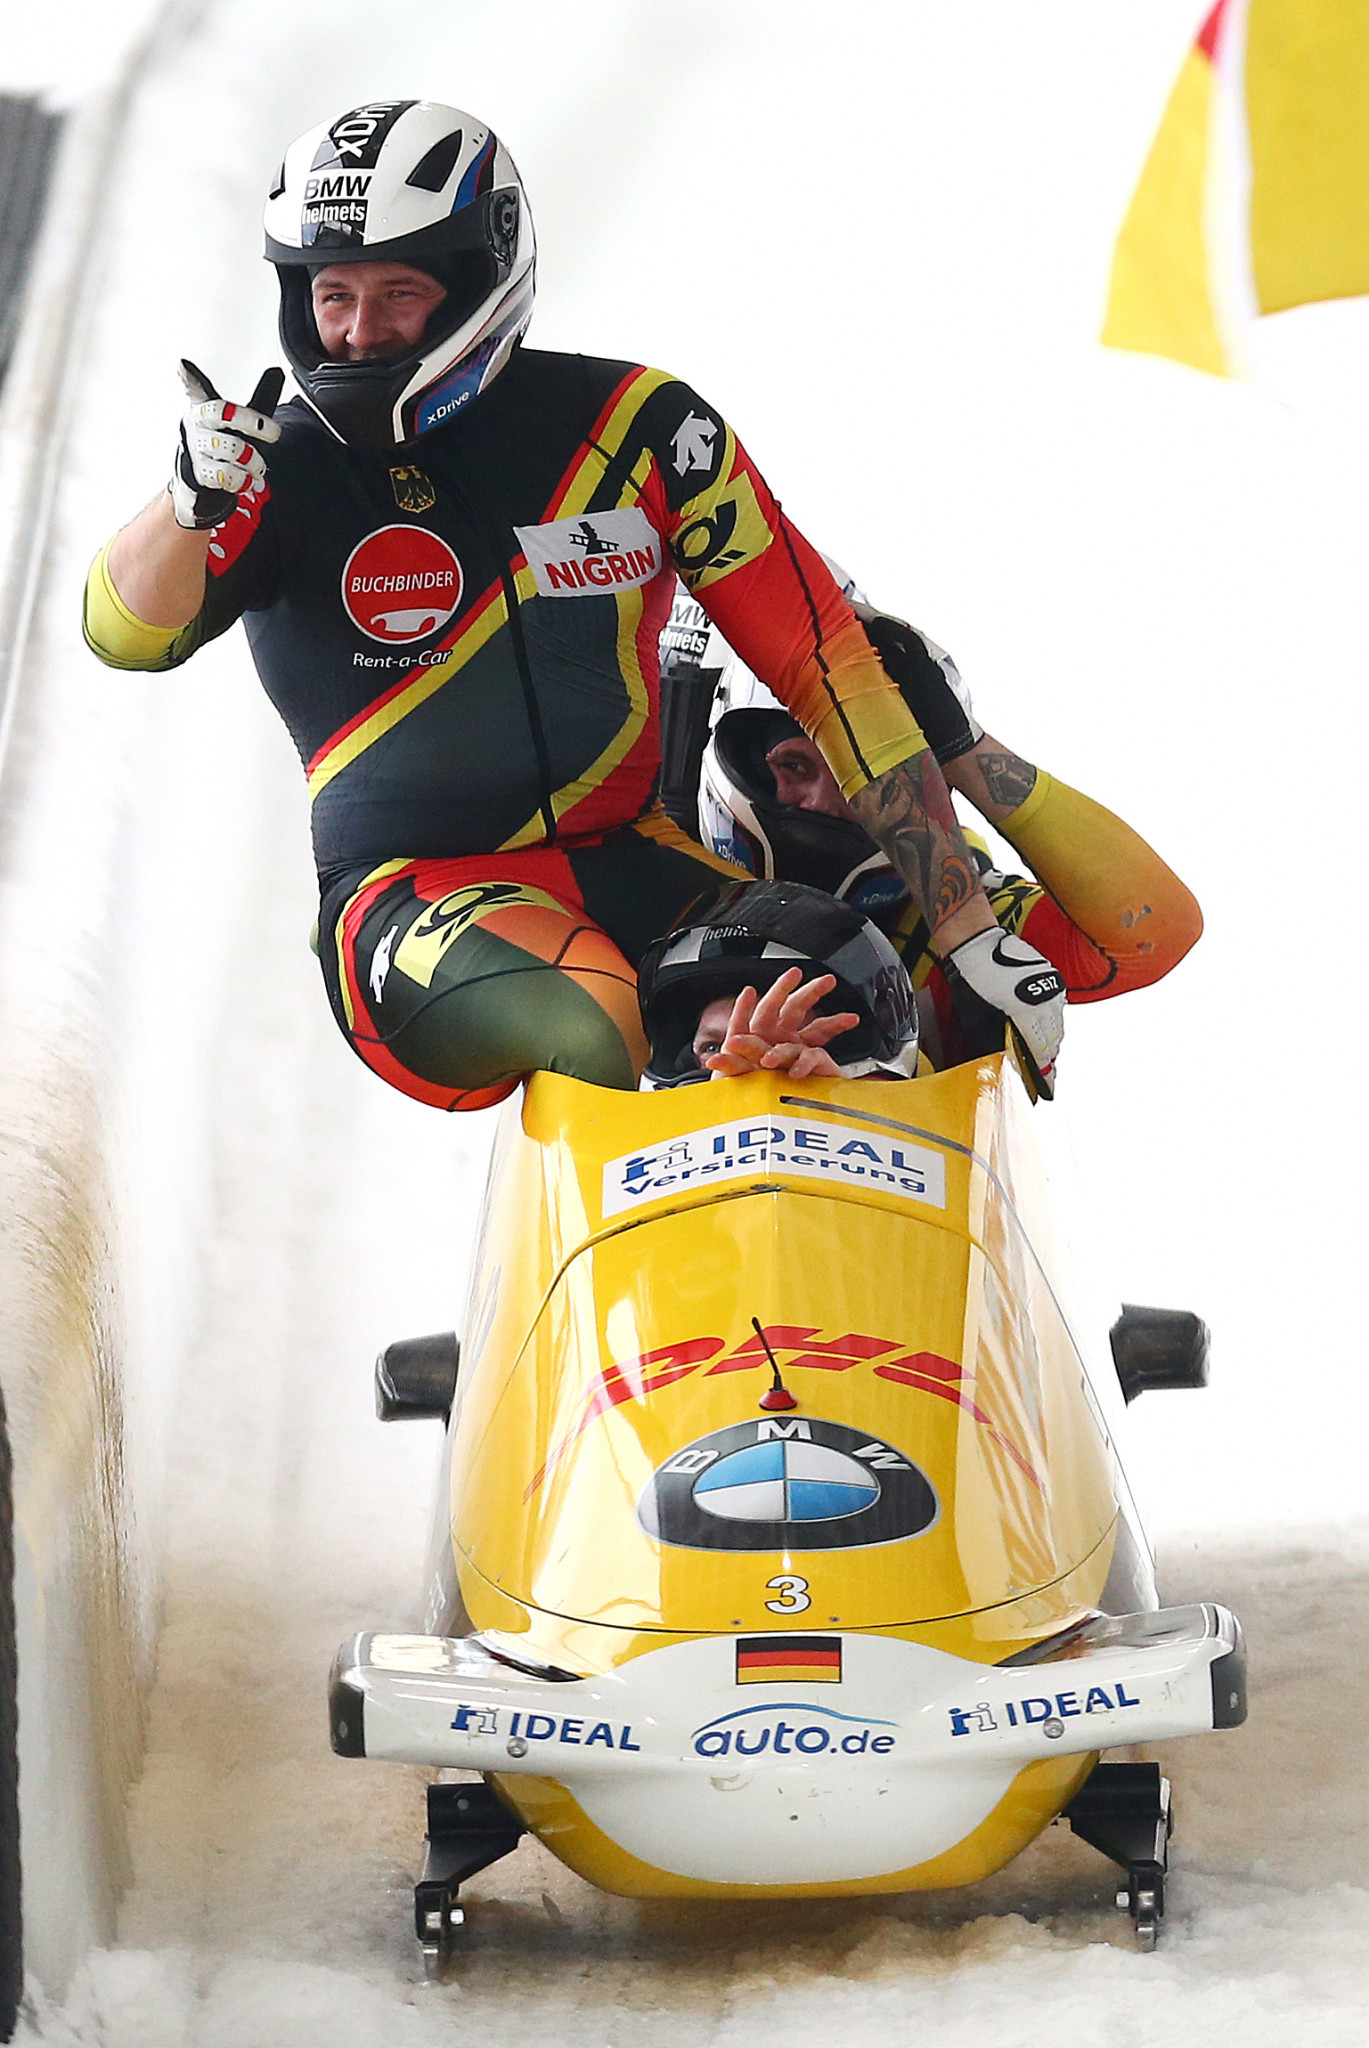 Germany's Paul Krenz has announced his retirement from bobsleigh and has taken up racing enduro bikes instead  ©Getty Images